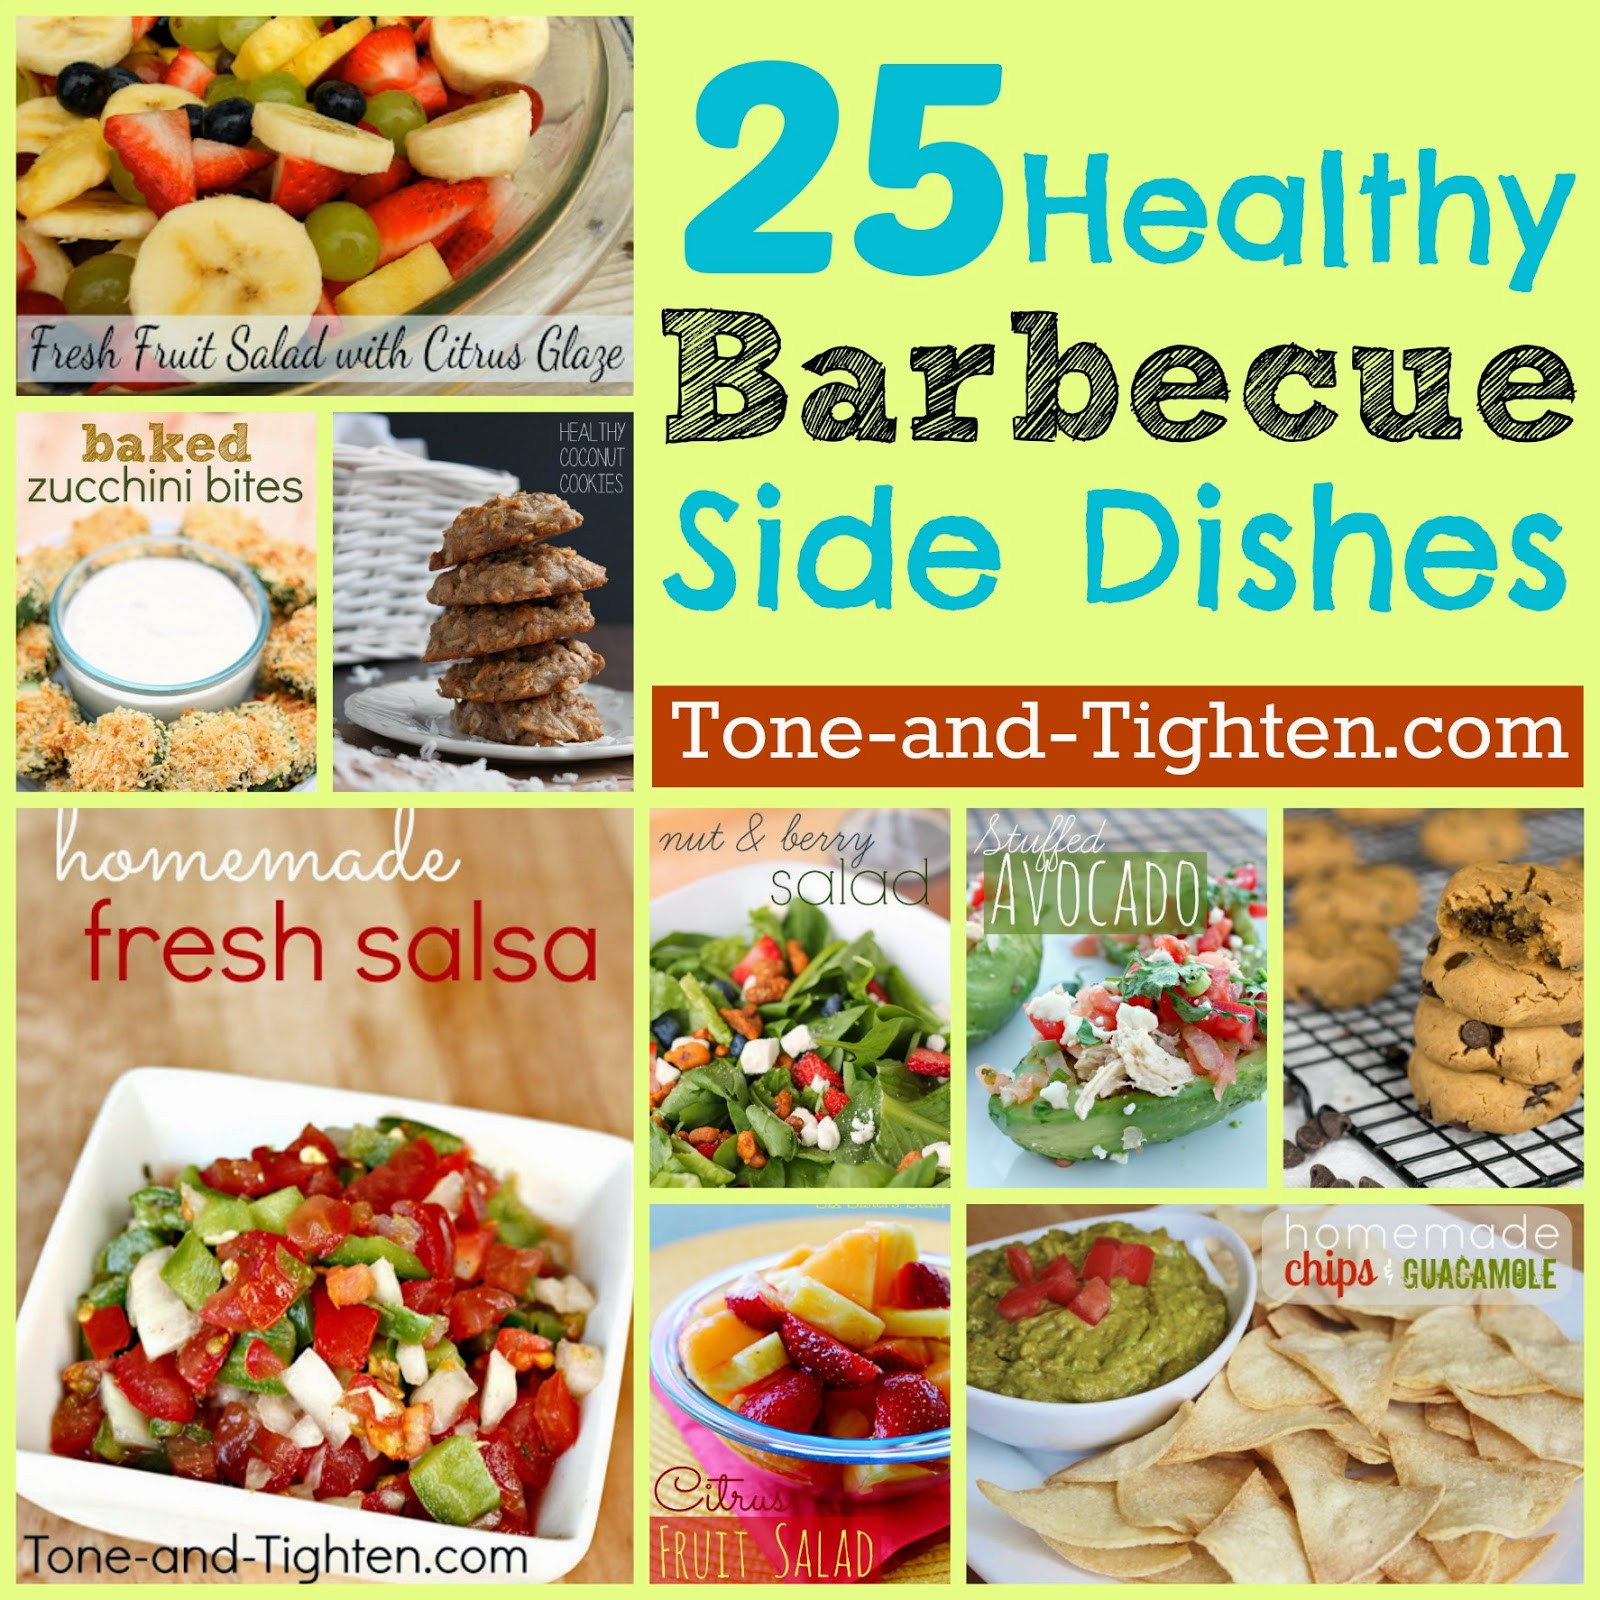 Summer Bbq Side Dishes
 25 Healthy Summer BBQ Side Dishes